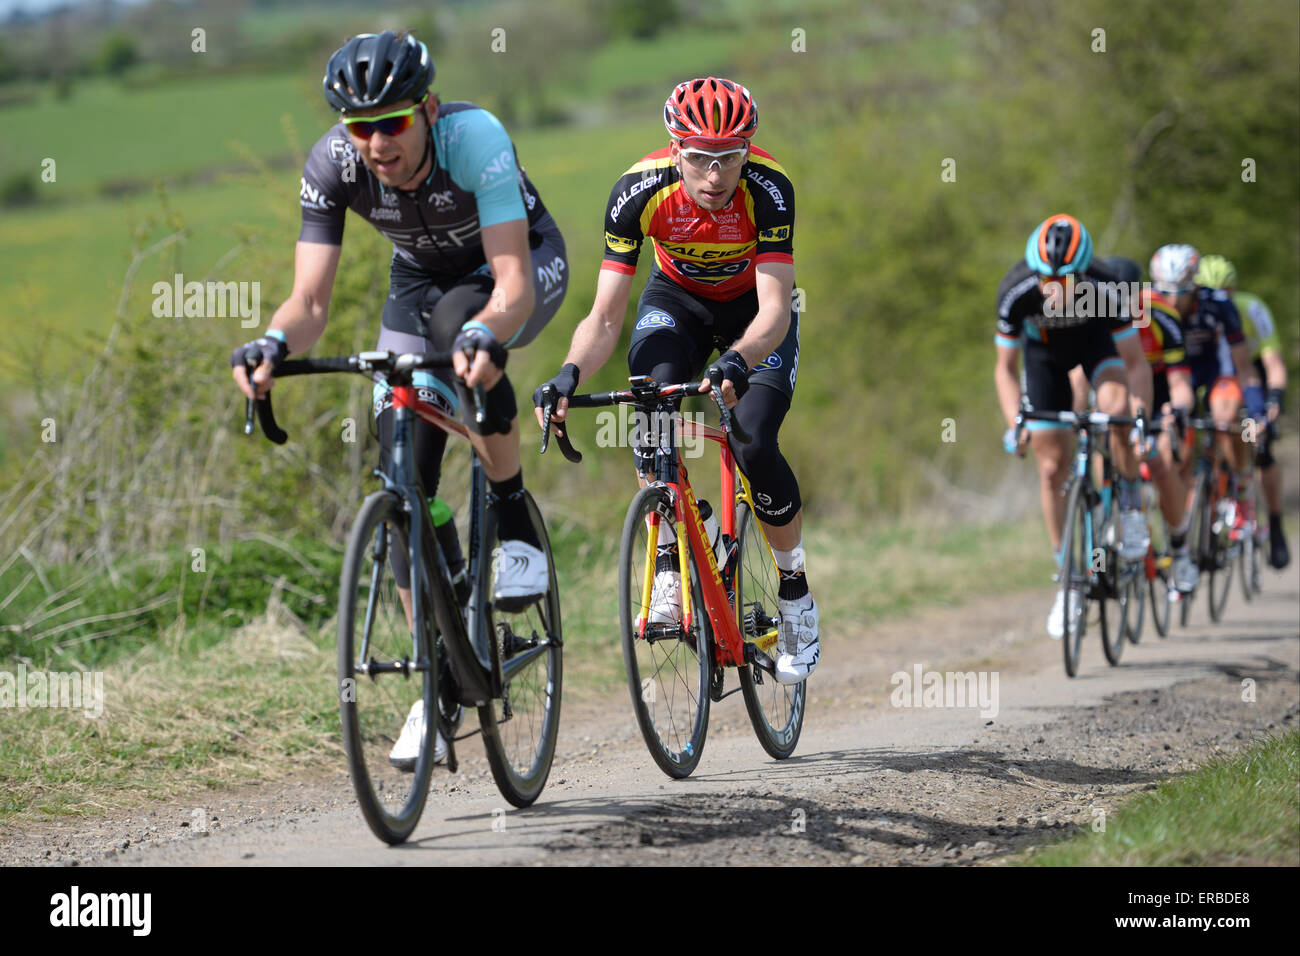 Karol Domagalski (in red) follows Marcin Bialoblocki (front) in the Cicle Classic International at Oakham, UK on 26 April 2015 Stock Photo